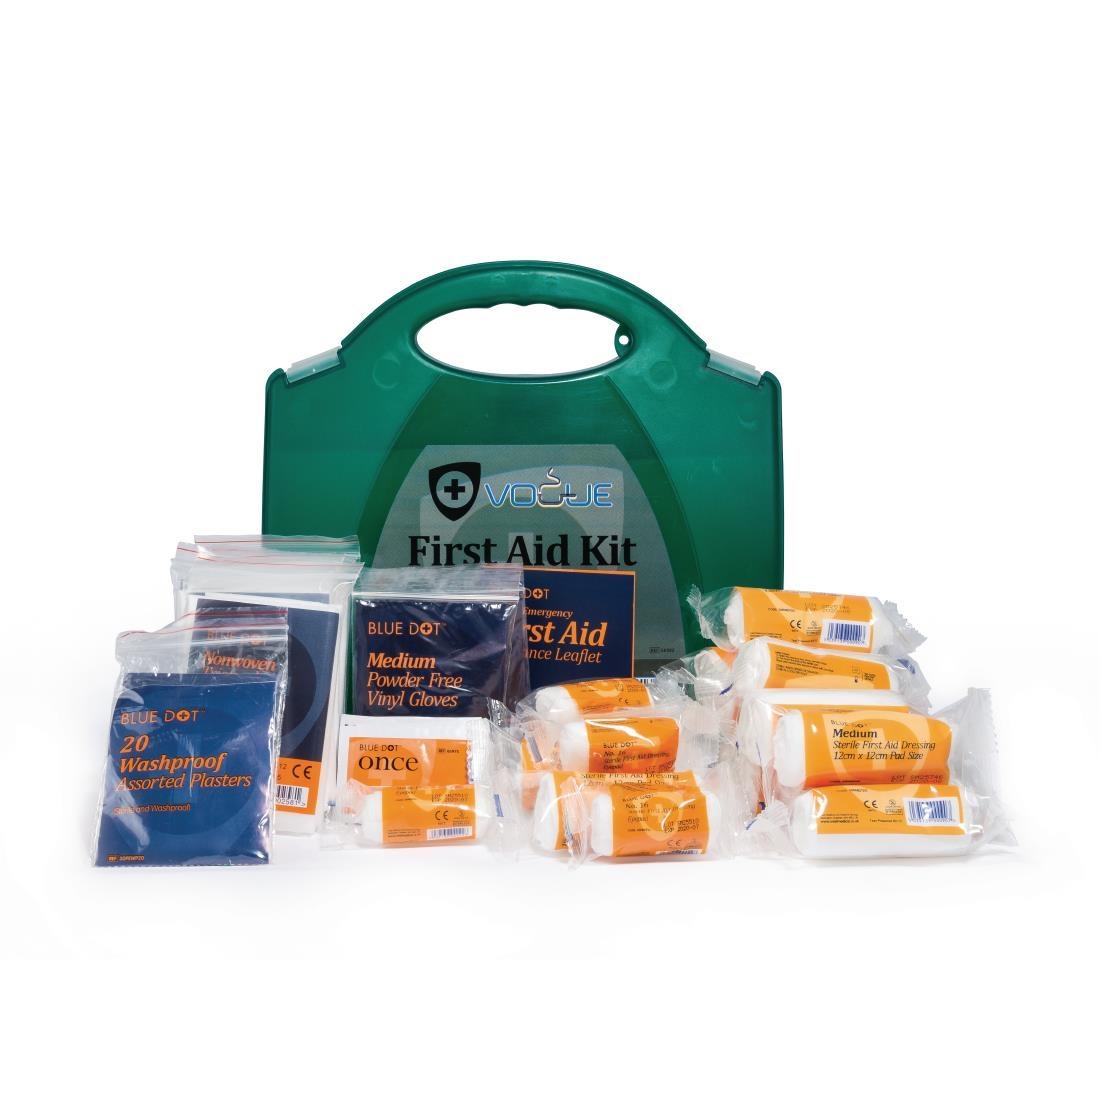 Vogue HSE First Aid Kit 20 person - GK092  - 3